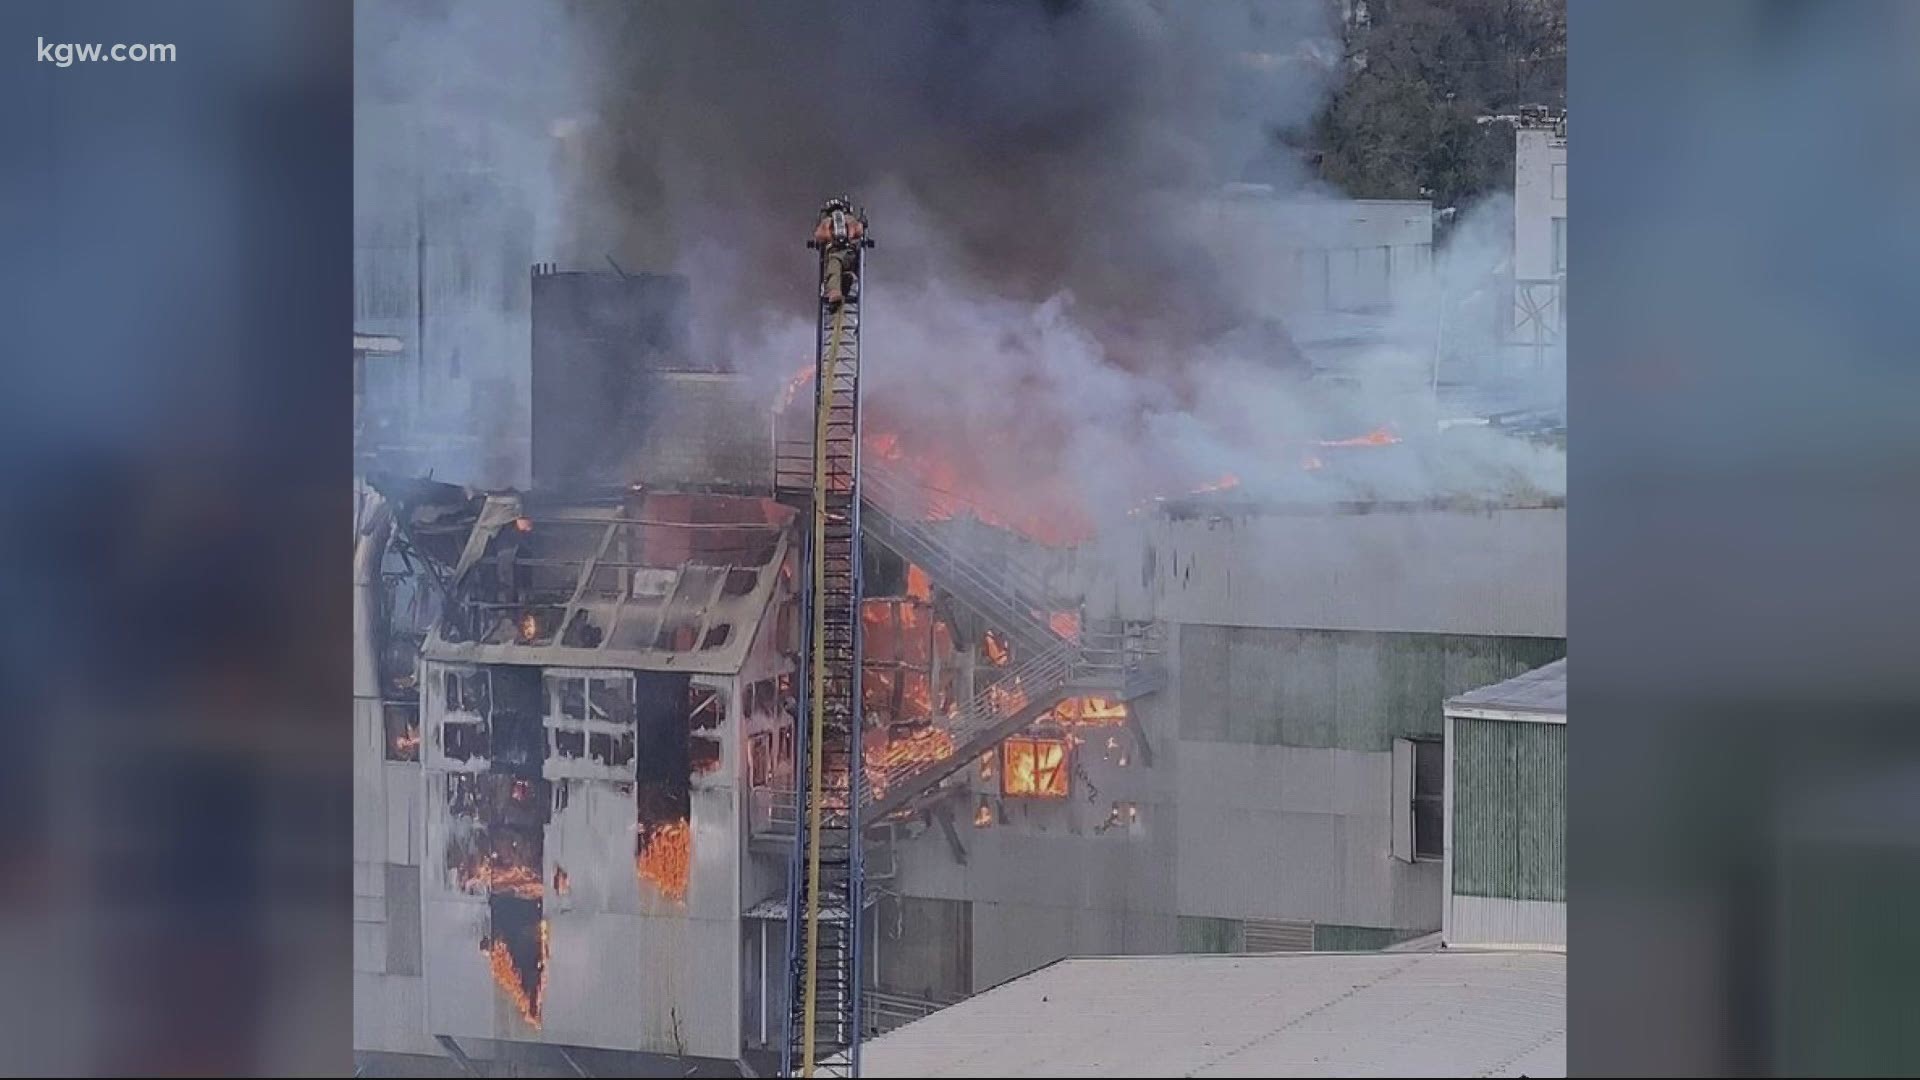 Firefighters responded to a three-alarm fire in Oregon City at the old Blue Heron Paper Mill.